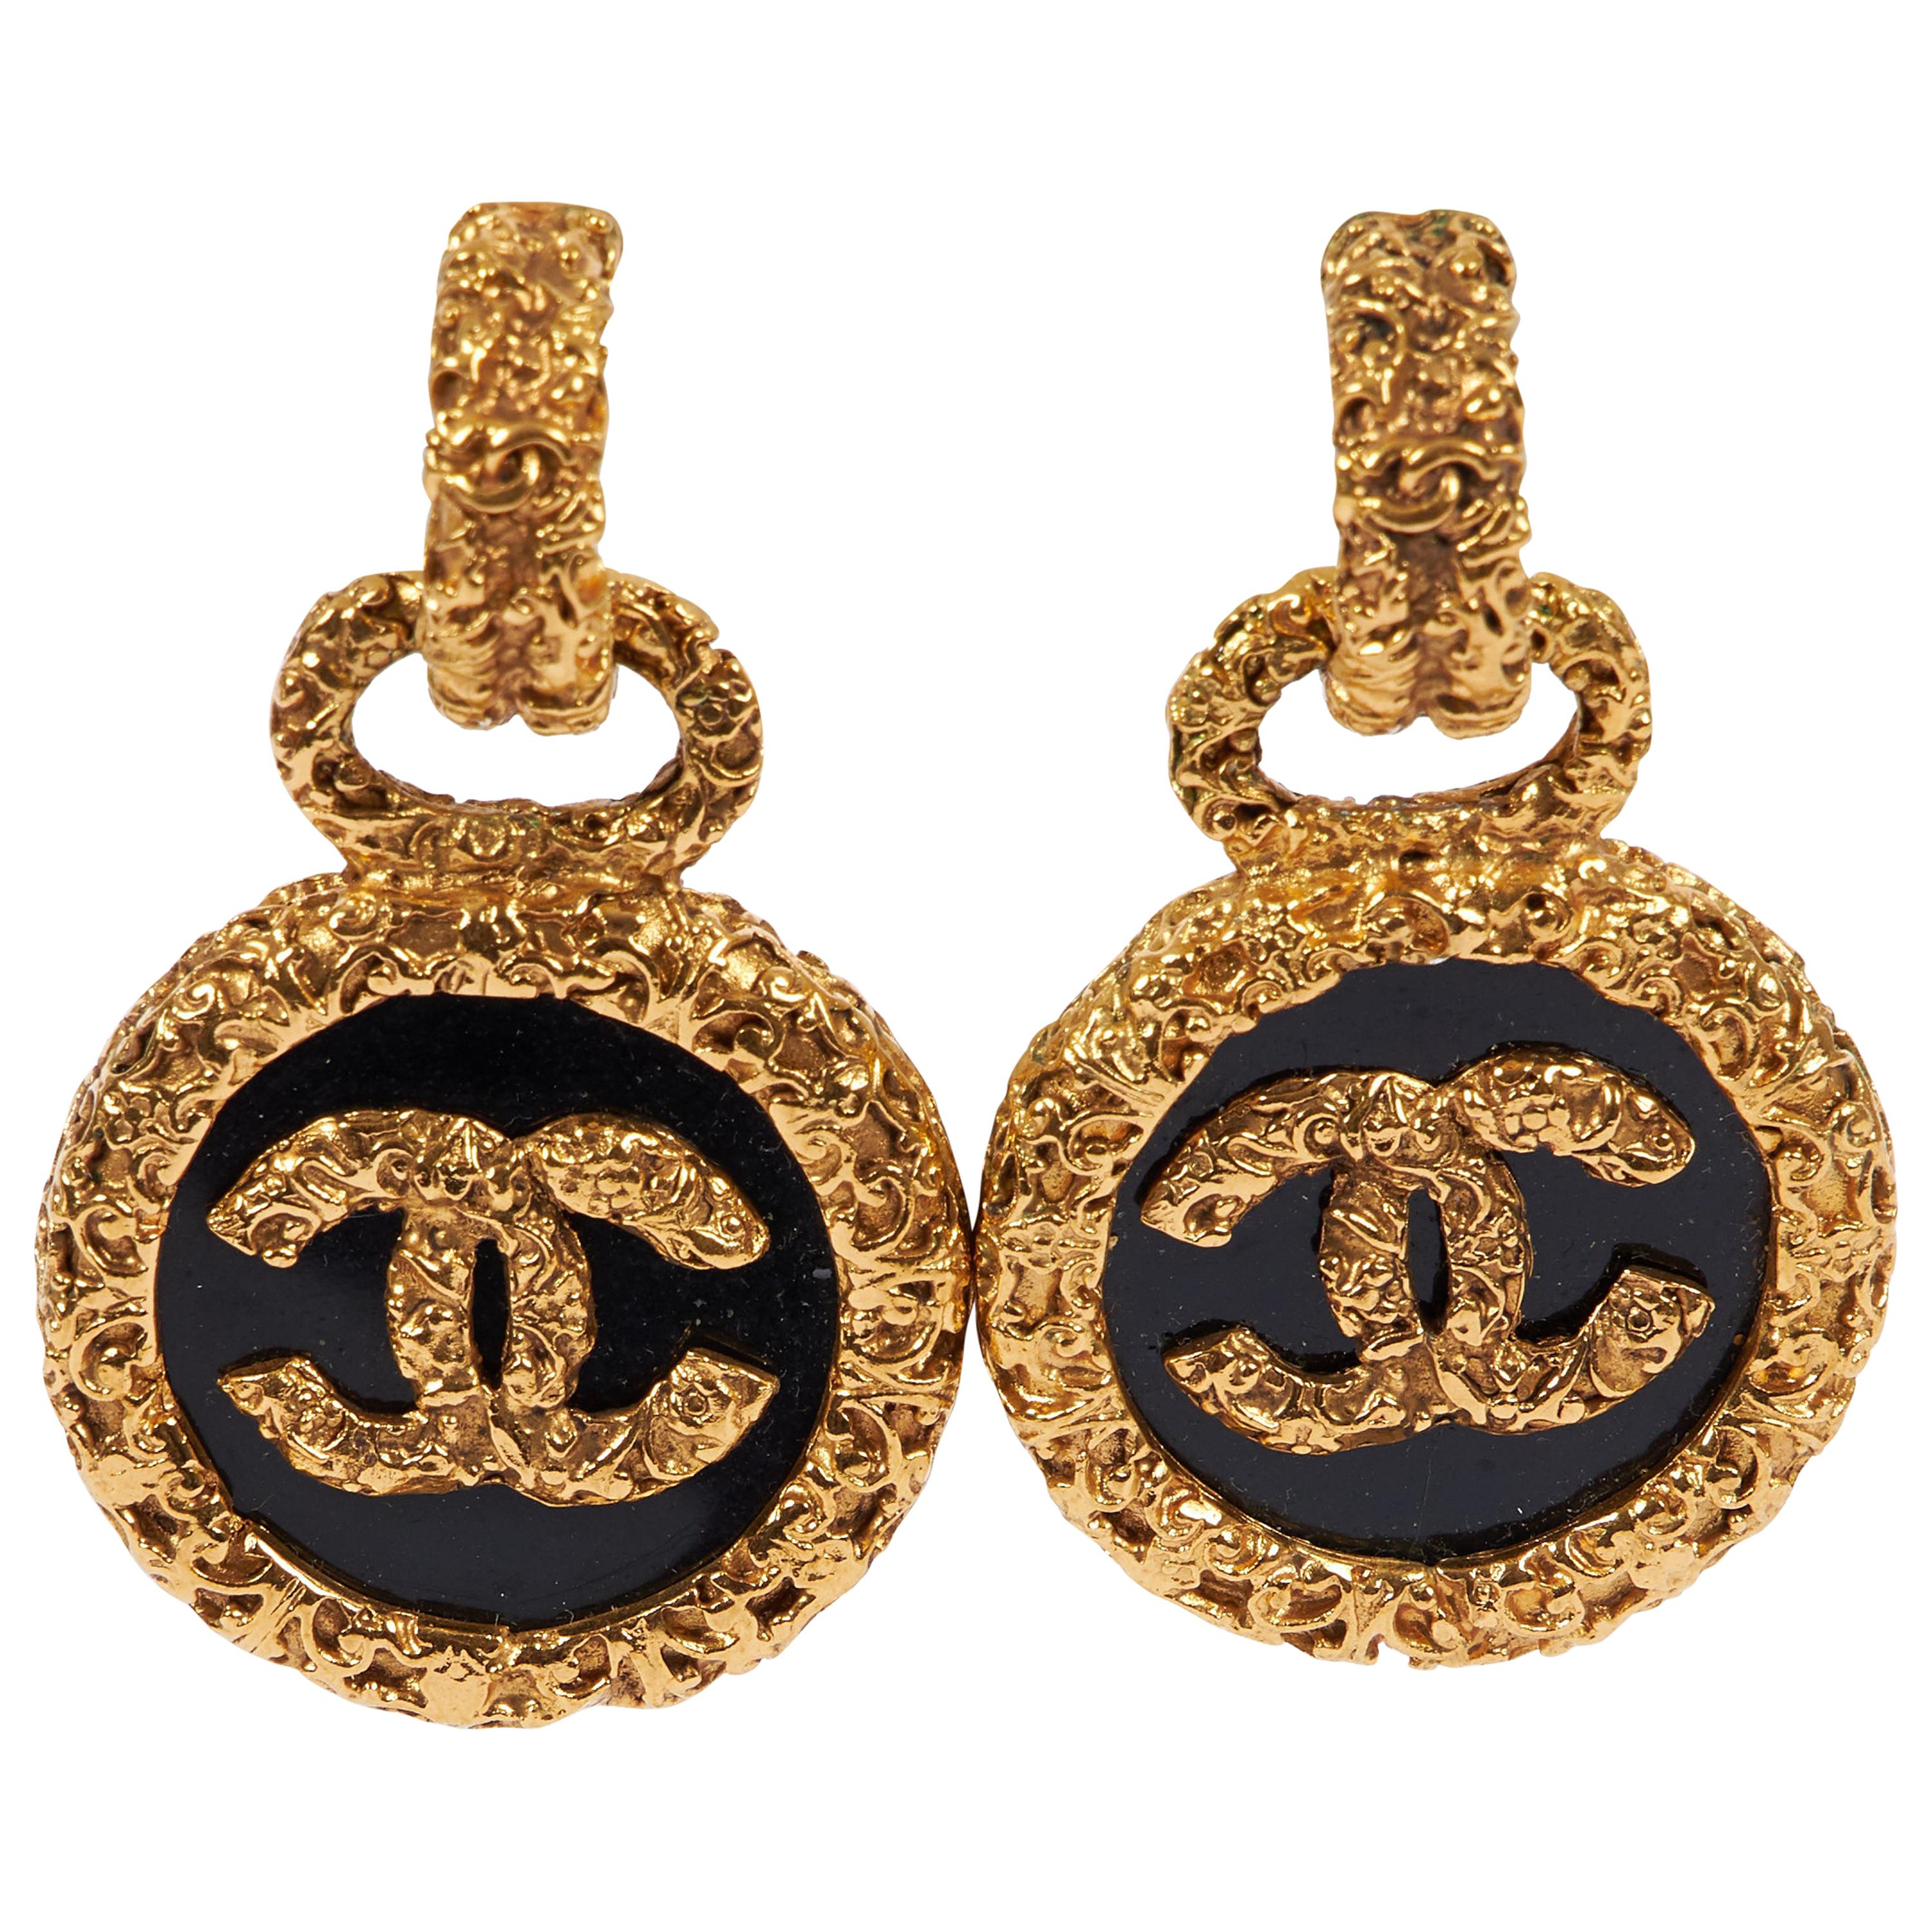 Owned CHANEL Jewelry - CancerduseinShops US, Pre - Borsa Chanel Timeless  in pelle trapuntata a zigzag blu